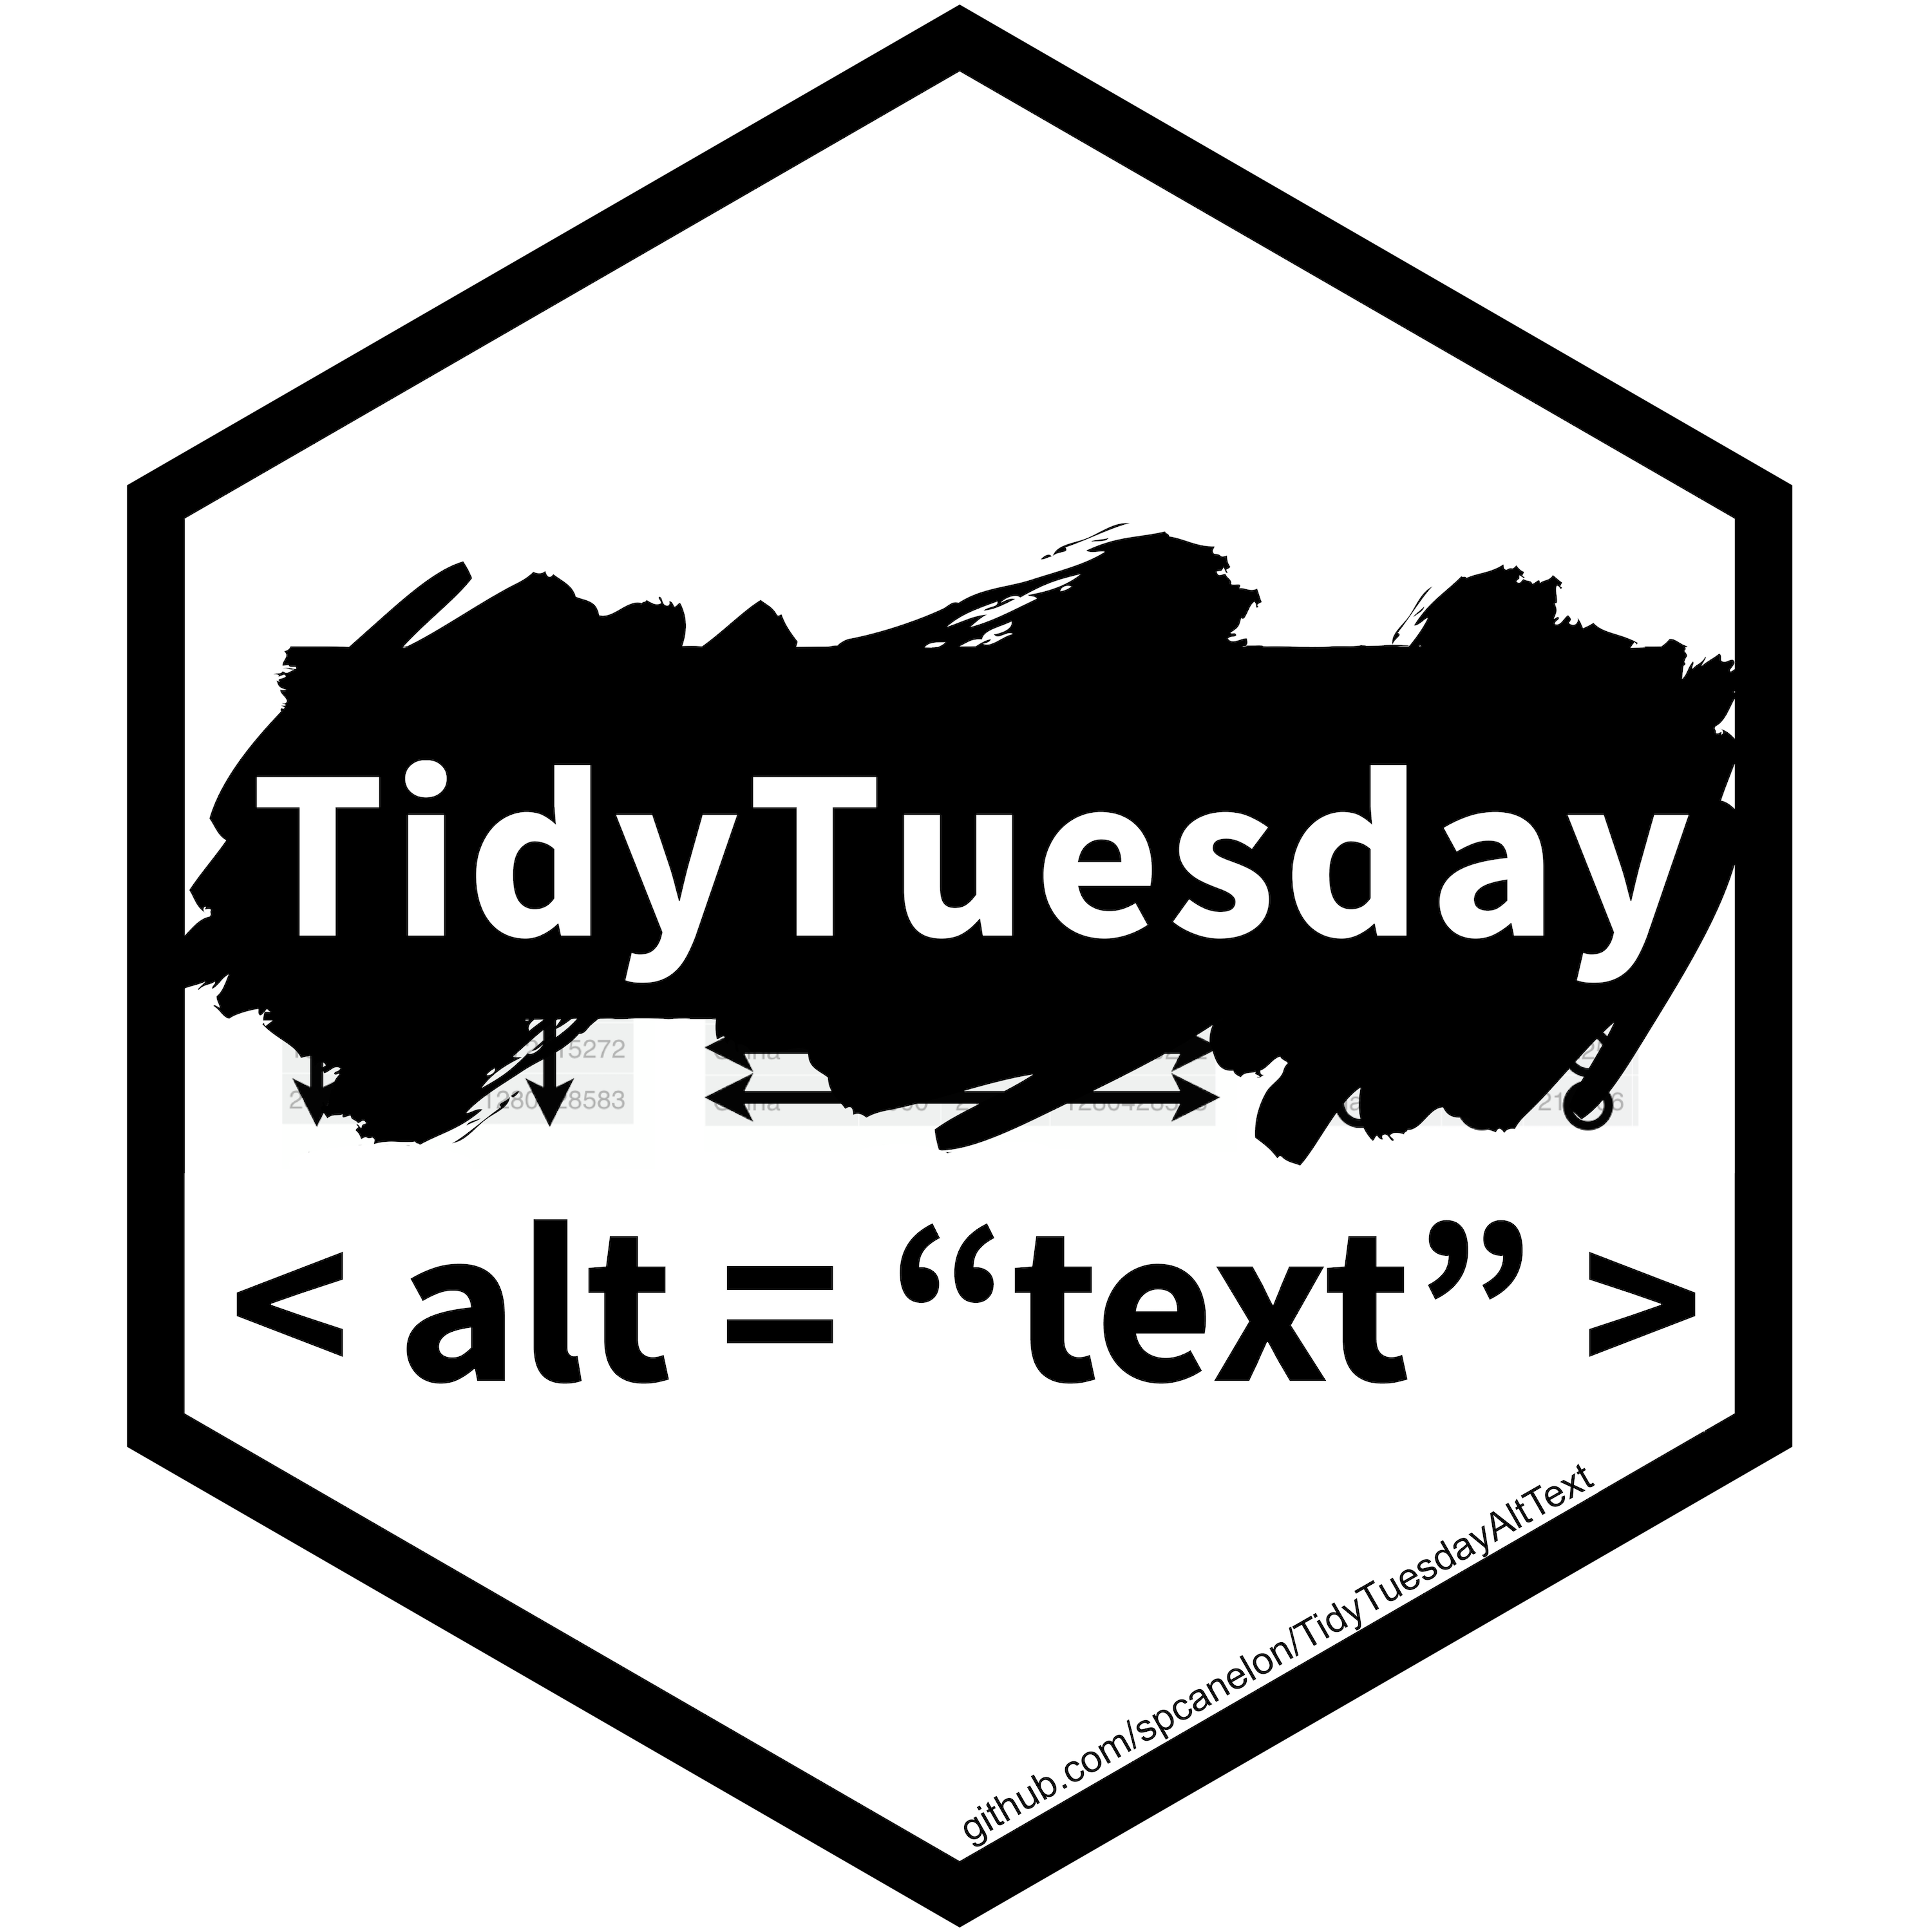 Hex logo for the package. White with a thick black border. Inside, the TidyTuesday logo on the top half which are the words TidyTuesday in white against a broad brush stroke of black paint. On the bottom half, the words alt = "text" in black against a white background and within angle brackets to simulate html code.